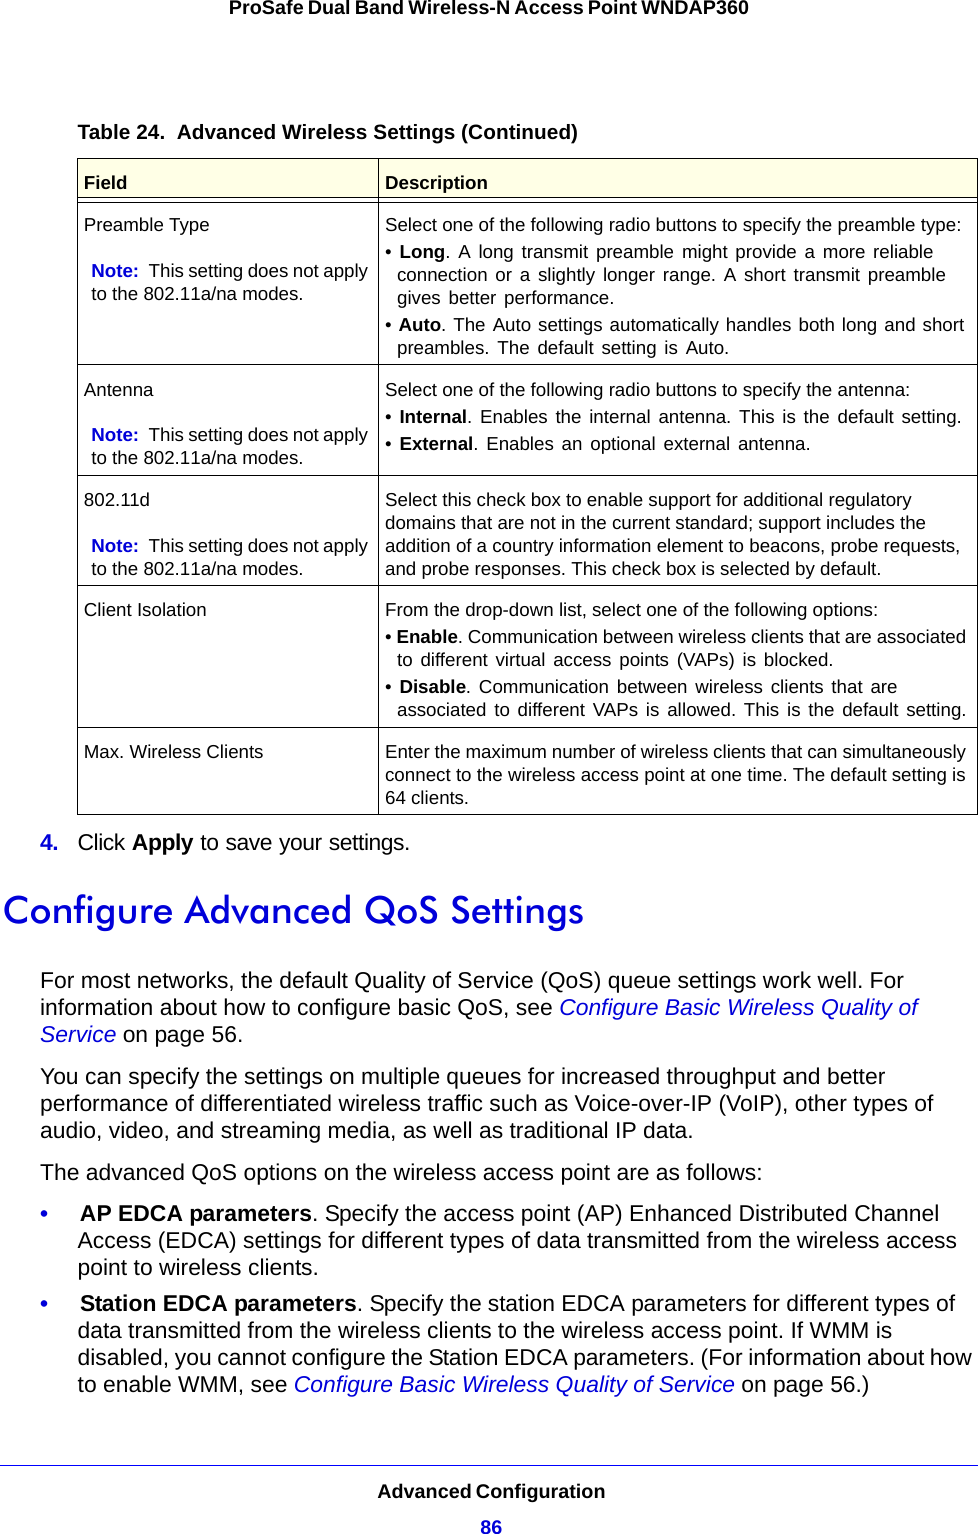 Advanced Configuration86ProSafe Dual Band Wireless-N Access Point WNDAP360 4.  Click Apply to save your settings. Configure Advanced QoS SettingsFor most networks, the default Quality of Service (QoS) queue settings work well. For information about how to configure basic QoS, see Configure Basic Wireless Quality of Service on page 56. You can specify the settings on multiple queues for increased throughput and better performance of differentiated wireless traffic such as Voice-over-IP (VoIP), other types of audio, video, and streaming media, as well as traditional IP data.The advanced QoS options on the wireless access point are as follows:•     AP EDCA parameters. Specify the access point (AP) Enhanced Distributed Channel Access (EDCA) settings for different types of data transmitted from the wireless access point to wireless clients.•     Station EDCA parameters. Specify the station EDCA parameters for different types of data transmitted from the wireless clients to the wireless access point. If WMM is disabled, you cannot configure the Station EDCA parameters. (For information about how to enable WMM, see Configure Basic Wireless Quality of Service on page 56.)Preamble TypeNote: This setting does not apply to the 802.11a/na modes.Select one of the following radio buttons to specify the preamble type:• Long. A long transmit preamble might provide a more reliable connection or a slightly longer range. A short transmit preamble gives better performance.• Auto. The Auto settings automatically handles both long and short preambles. The default setting is Auto.AntennaNote: This setting does not apply to the 802.11a/na modes.Select one of the following radio buttons to specify the antenna:• Internal. Enables the internal antenna. This is the default setting.• External. Enables an optional external antenna.802.11dNote: This setting does not apply to the 802.11a/na modes.Select this check box to enable support for additional regulatory domains that are not in the current standard; support includes the addition of a country information element to beacons, probe requests, and probe responses. This check box is selected by default.Client Isolation From the drop-down list, select one of the following options:• Enable. Communication between wireless clients that are associated to different virtual access points (VAPs) is blocked.• Disable. Communication between wireless clients that are associated to different VAPs is allowed. This is the default setting.Max. Wireless Clients Enter the maximum number of wireless clients that can simultaneously connect to the wireless access point at one time. The default setting is 64 clients.Table 24.  Advanced Wireless Settings (Continued)Field Description